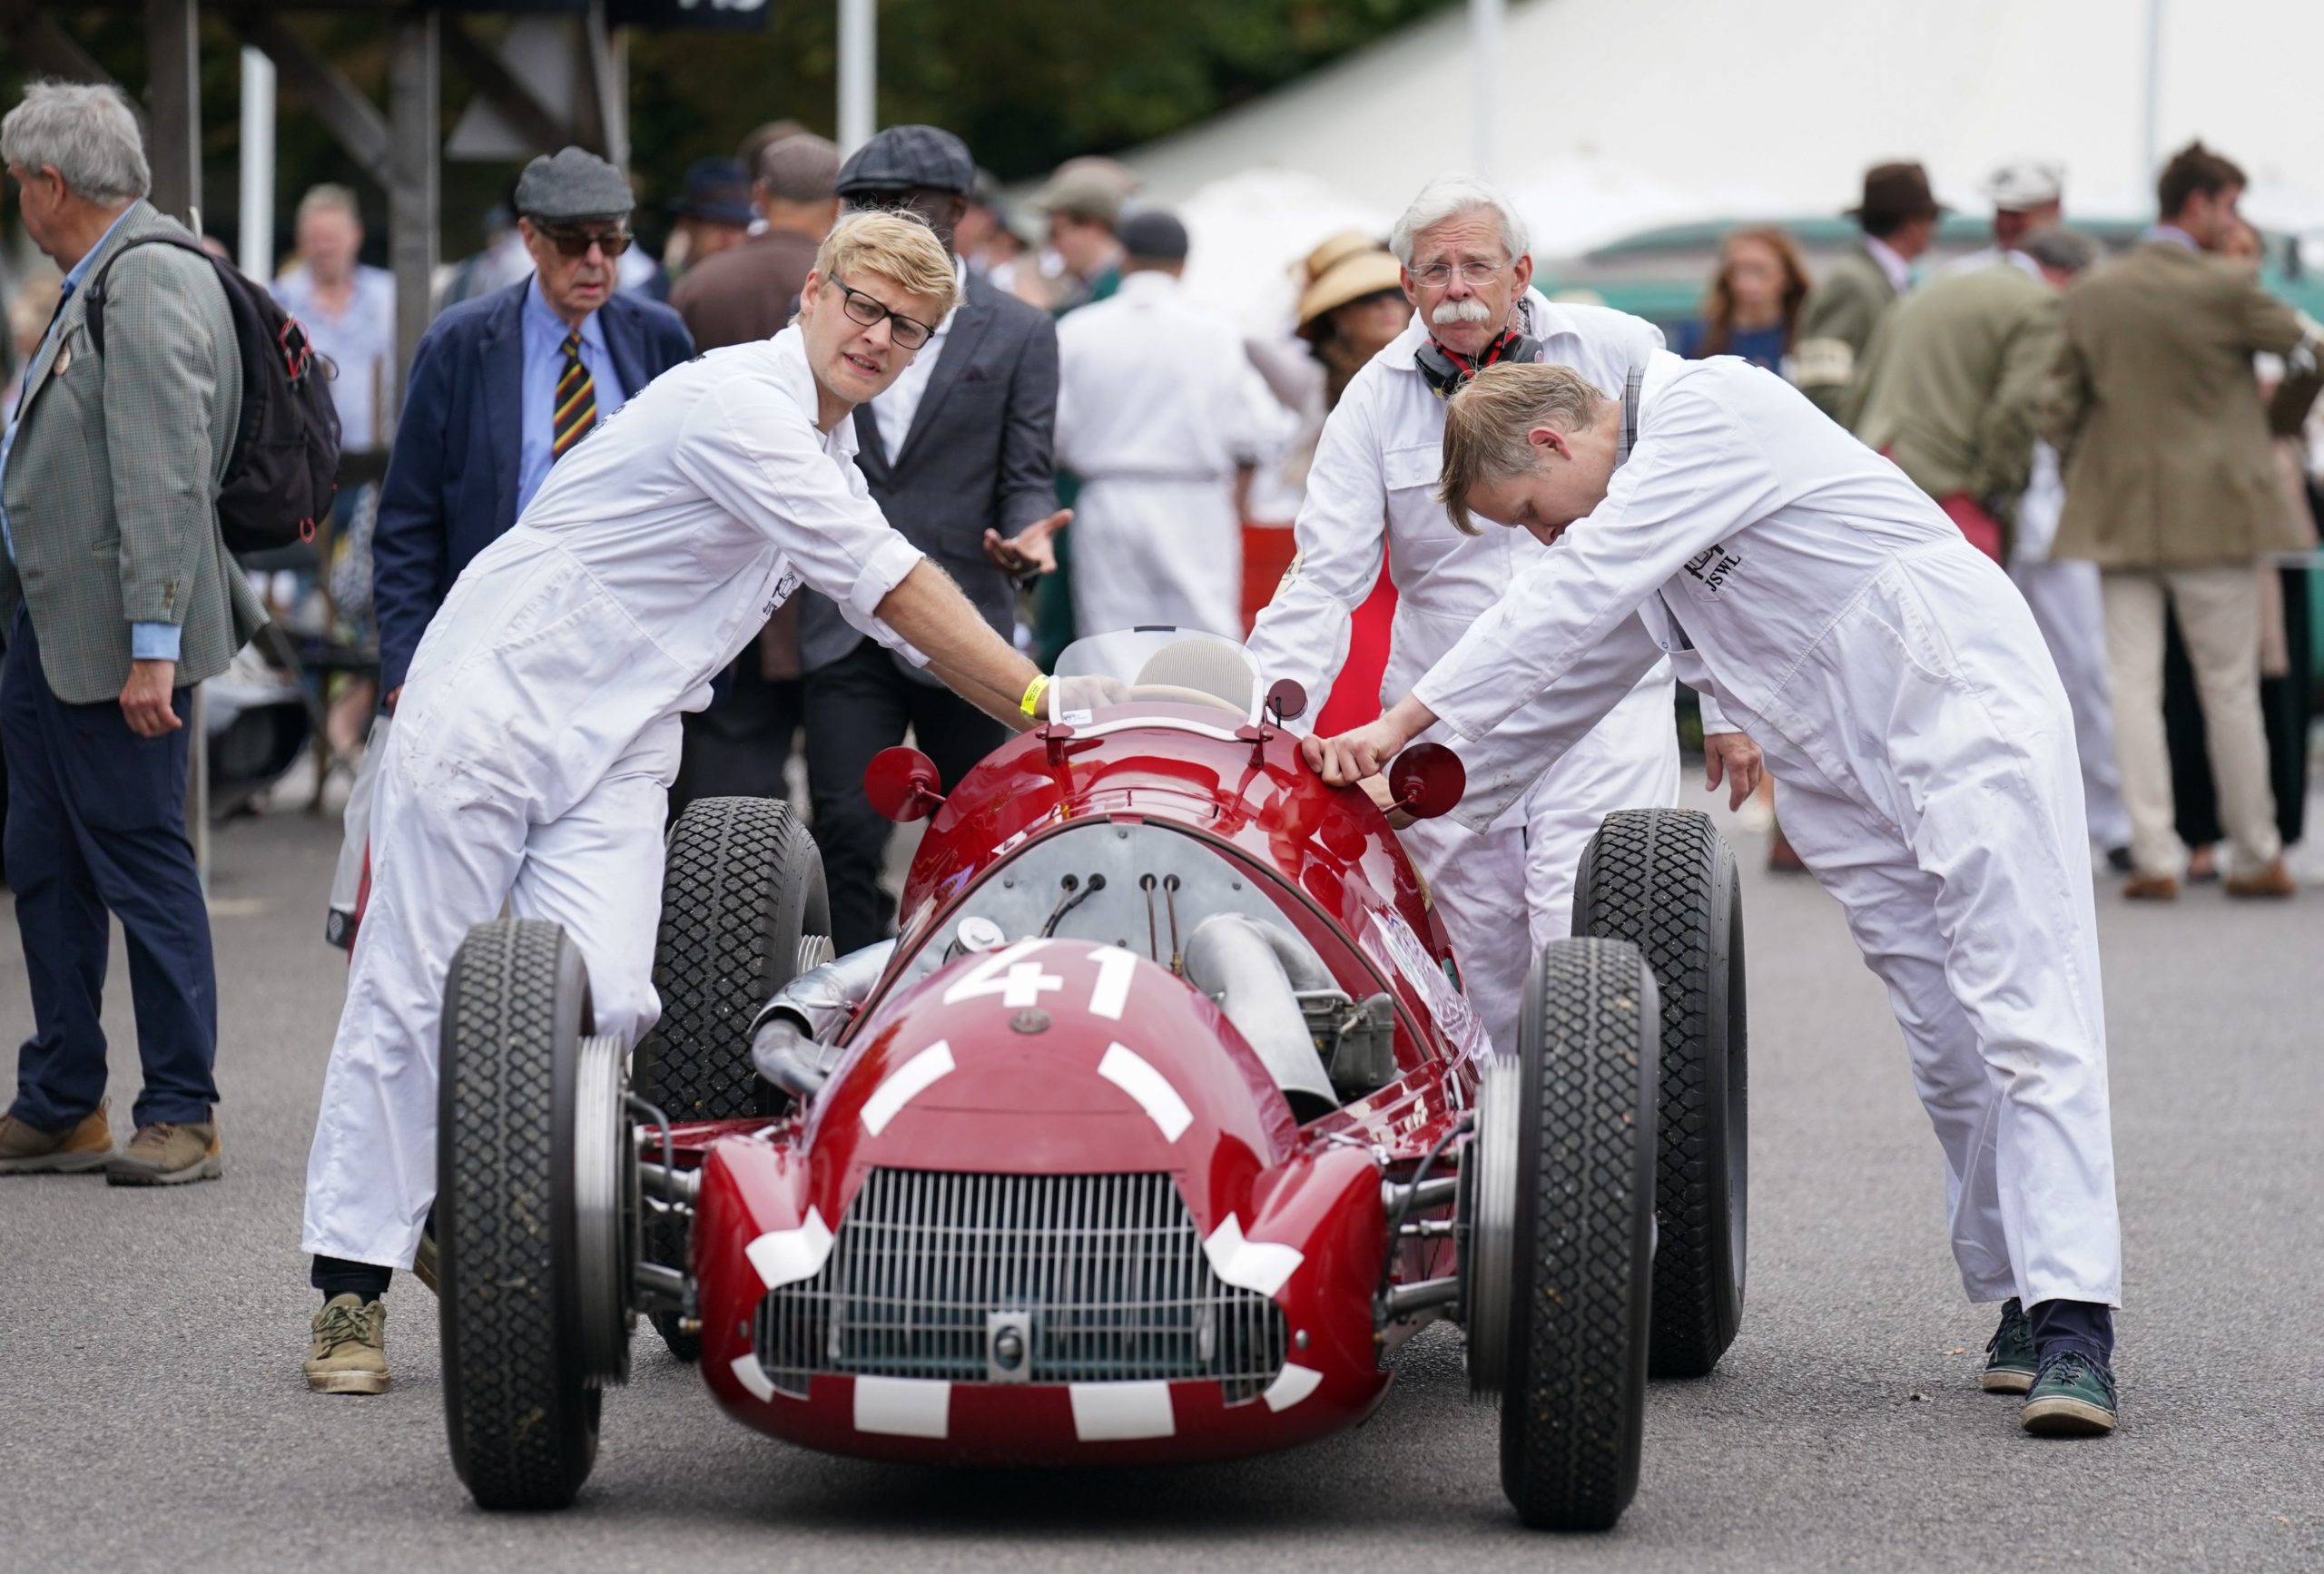 In Pictures: Classic motors and vintage glamour at Goodwood Revival